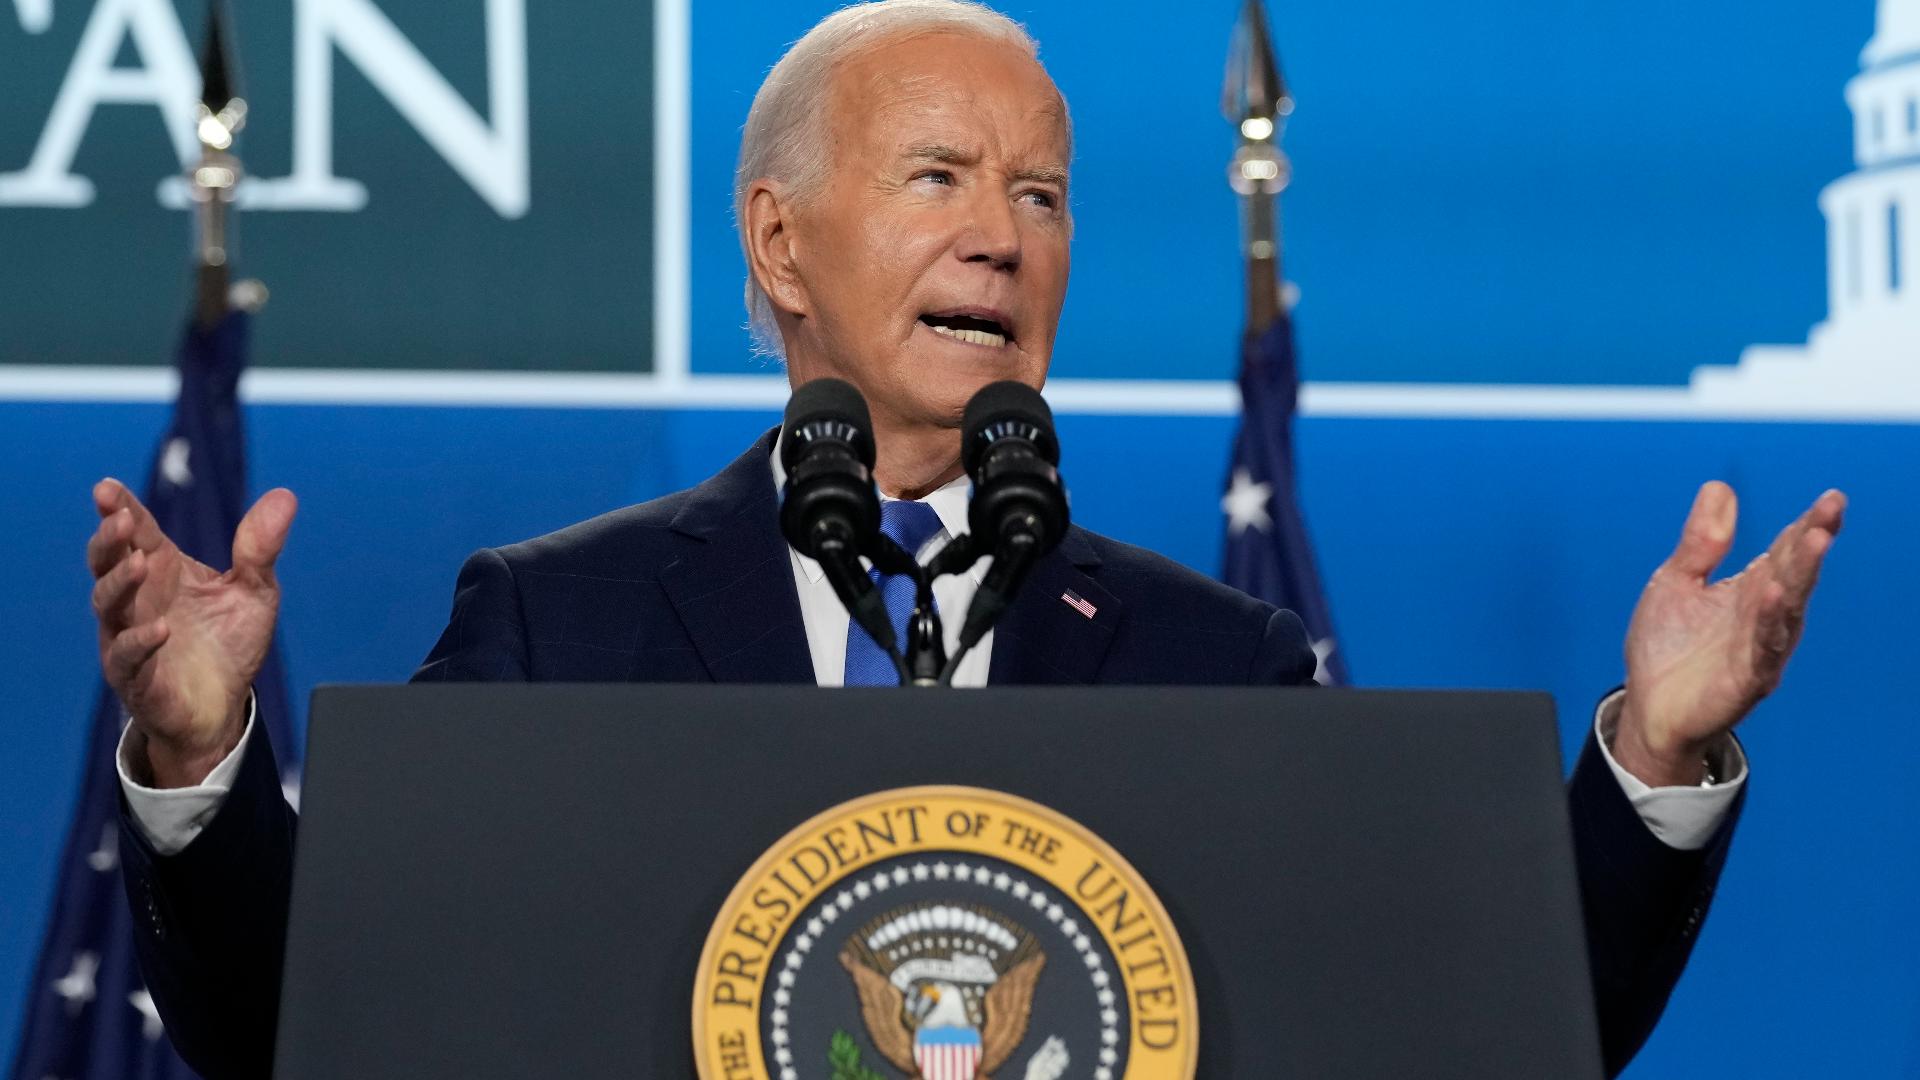 President Biden spoke from the Walter E. Washington Convention Center, which is a short distance from the White House.